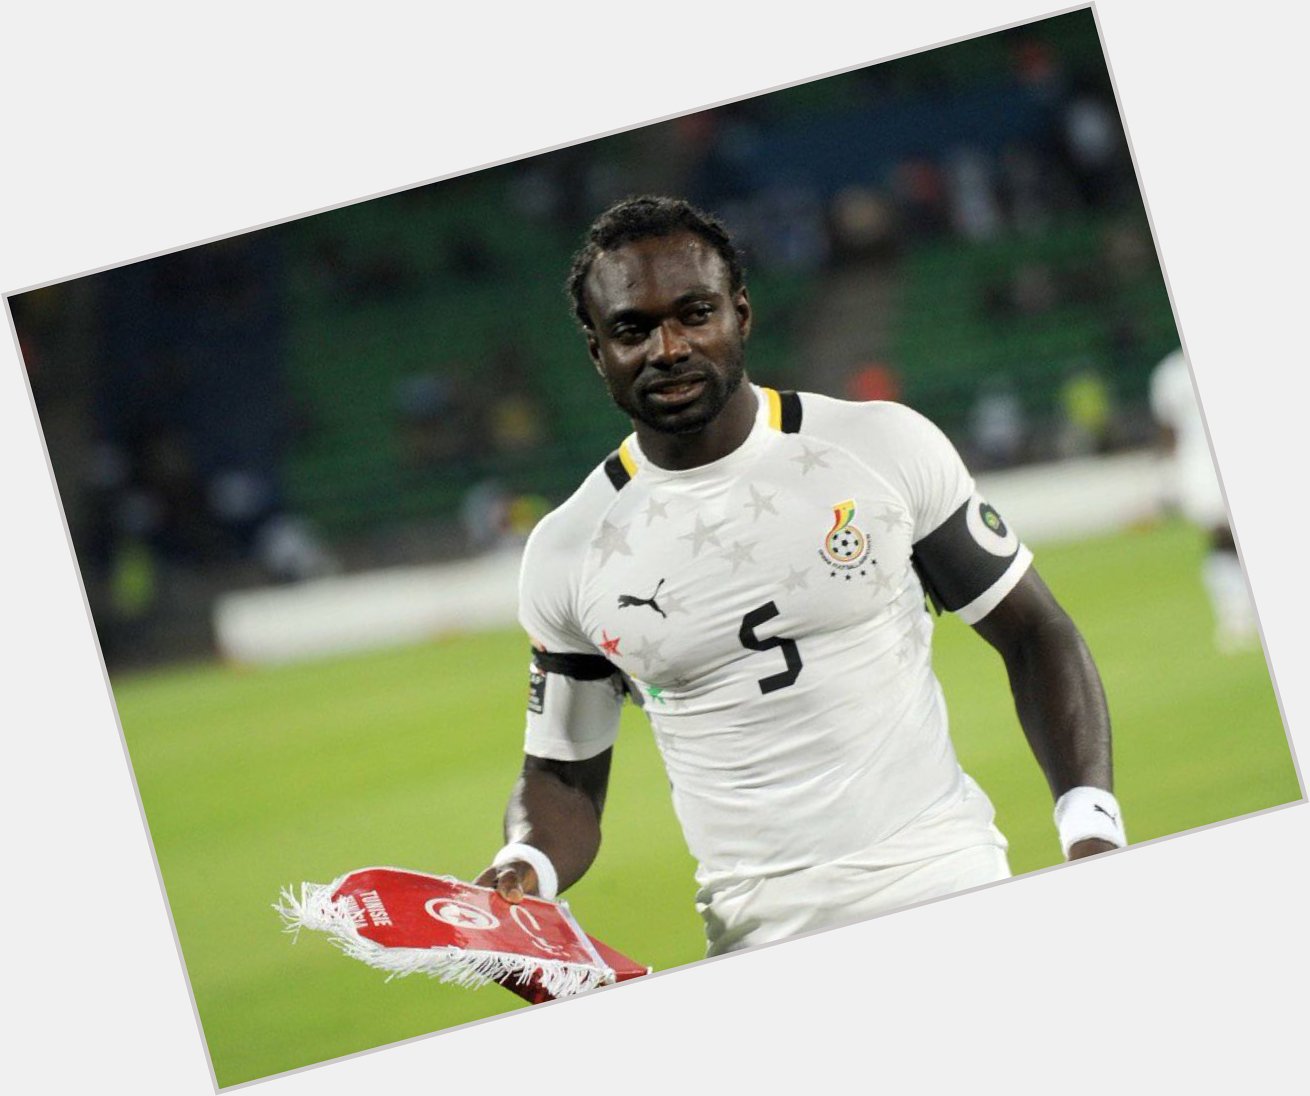 86 caps for the  Black Stars
3 goals

The Rock of Gibraltar is 39 years today. Happy birthday John Mensah!  